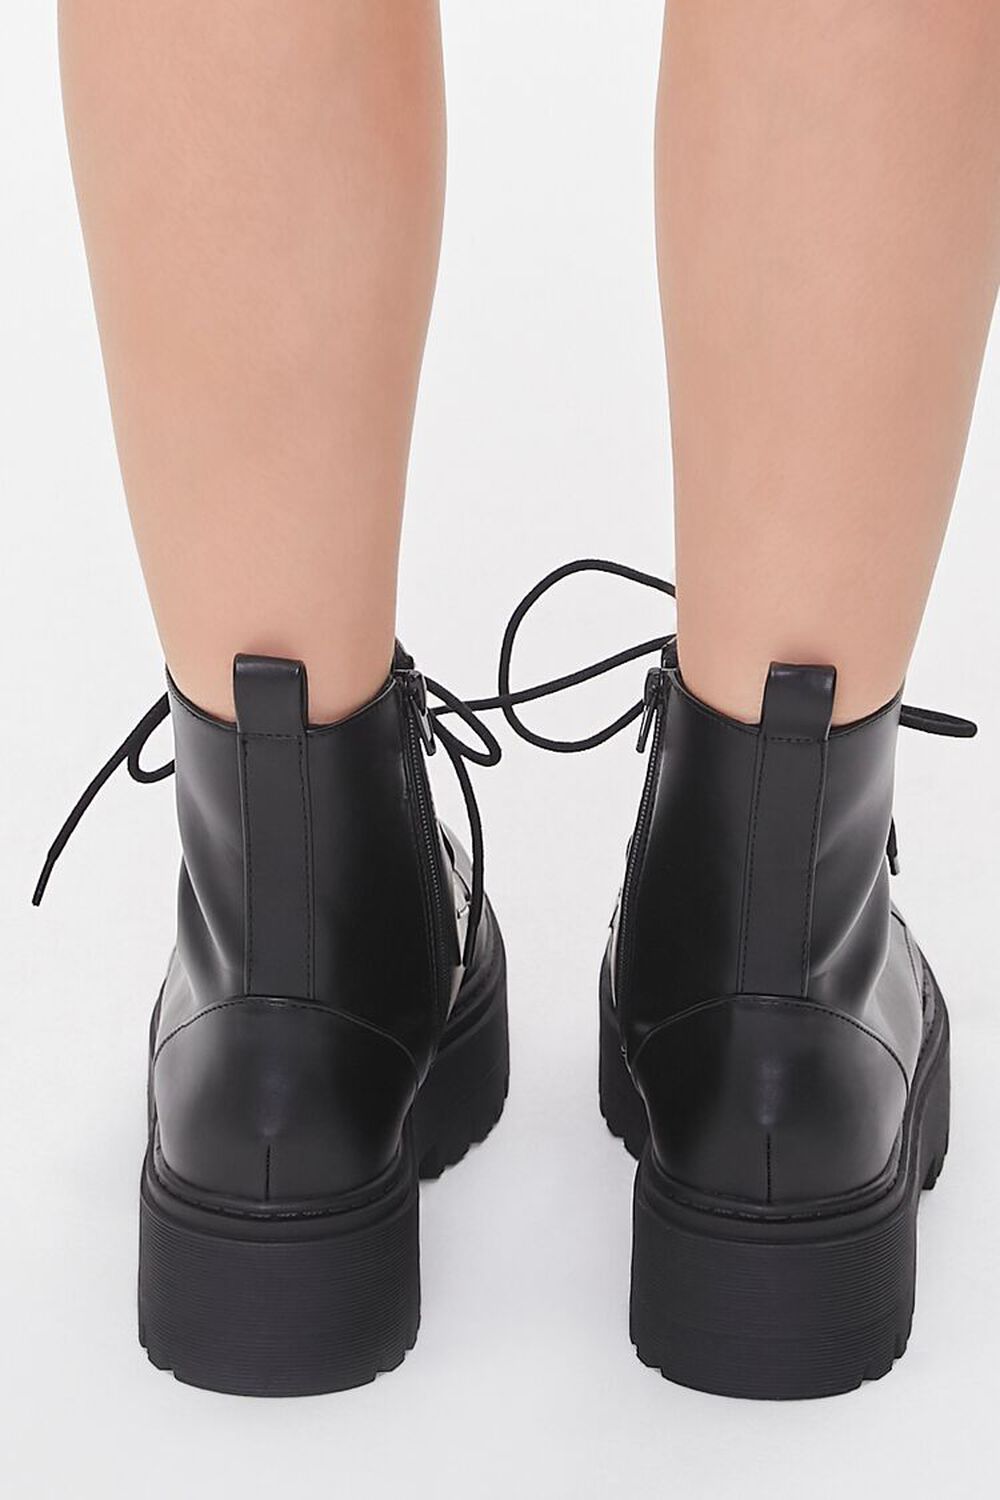 BLACK/BLACK Faux Leather Lace-Up Booties, image 3